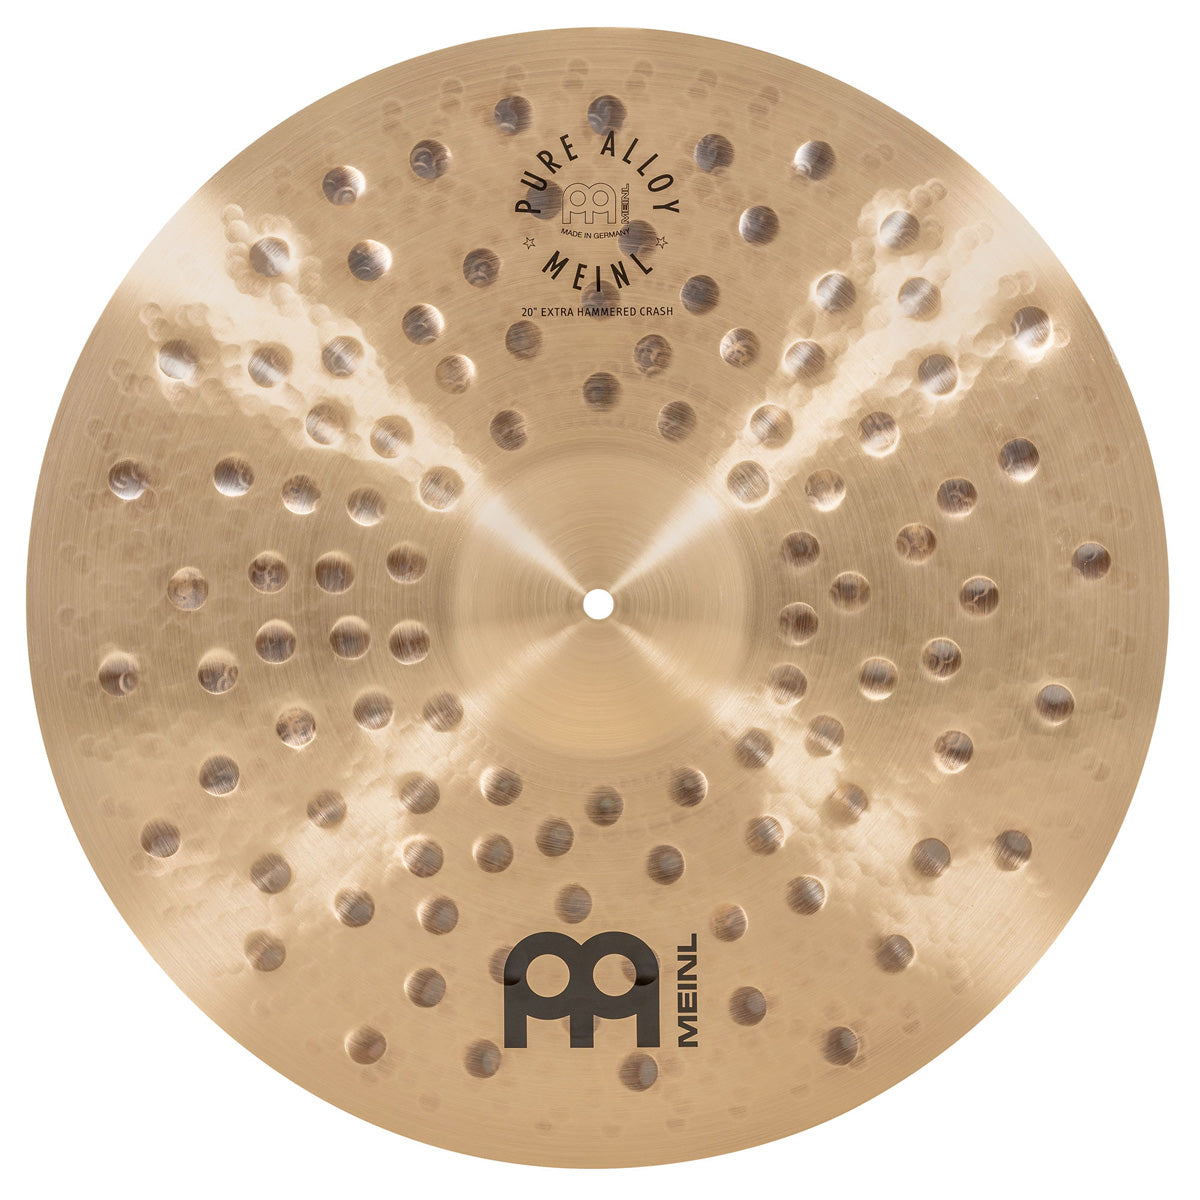 Meinl Pure Alloy 20" Extra Hammered Crash Cymbal